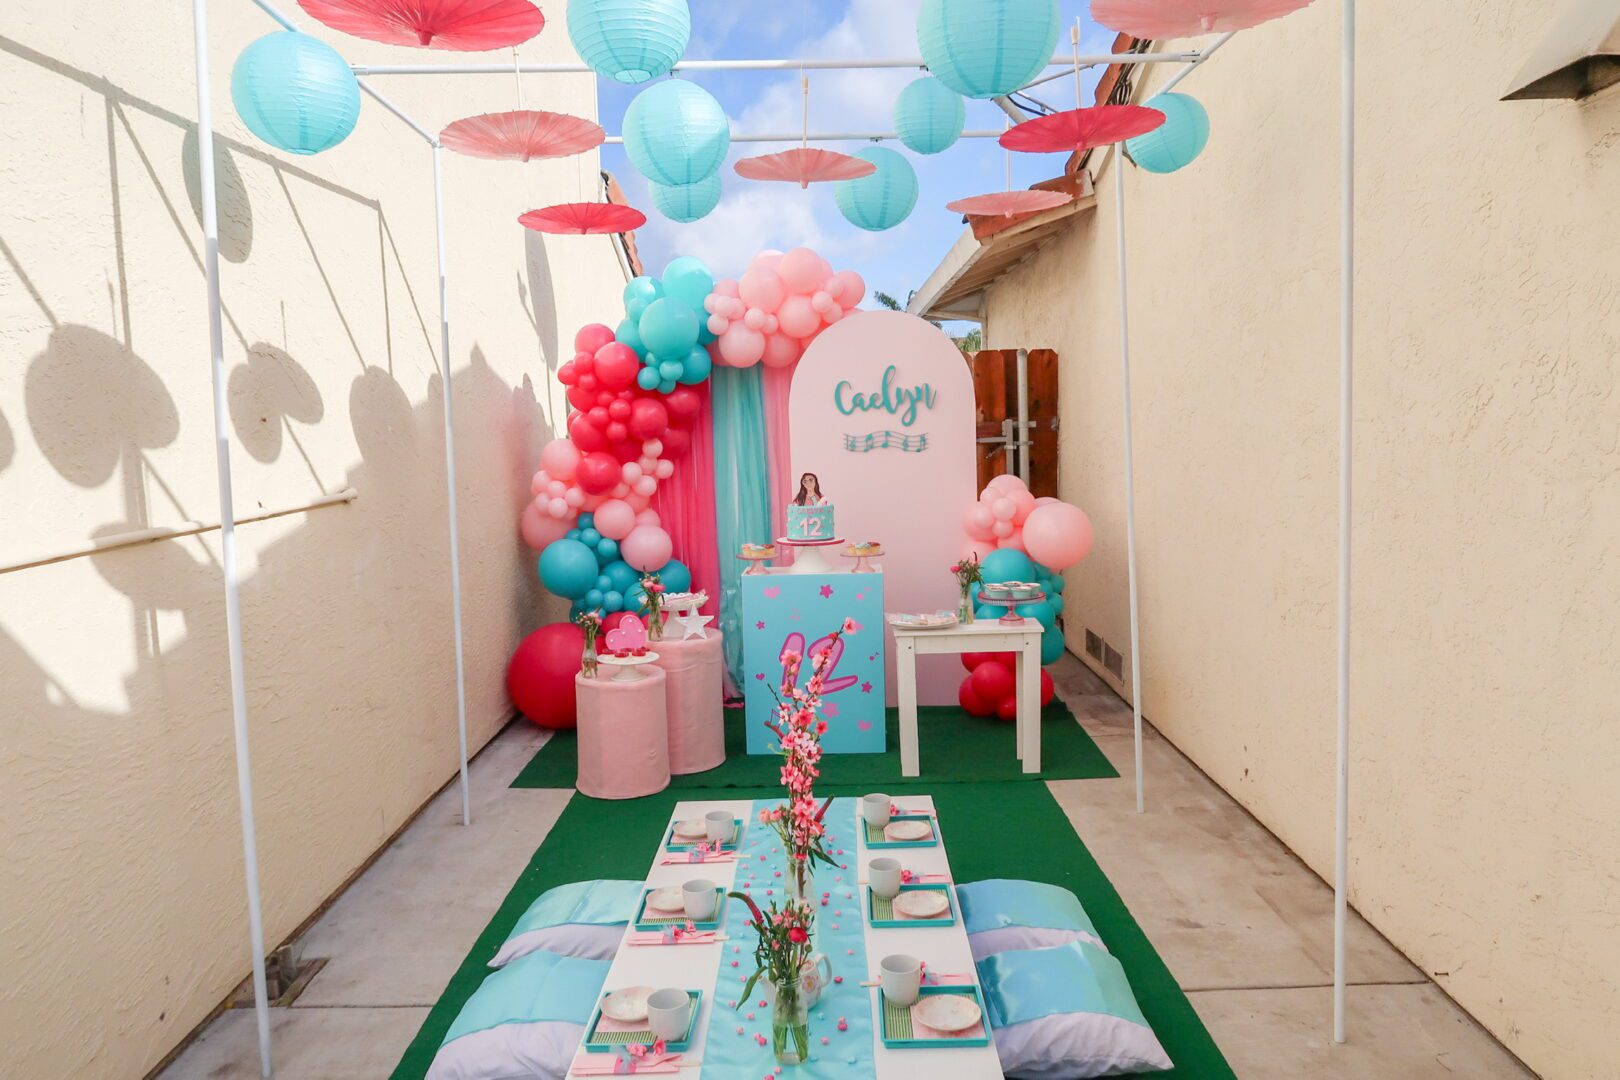 A table with balloons and other decorations on it.